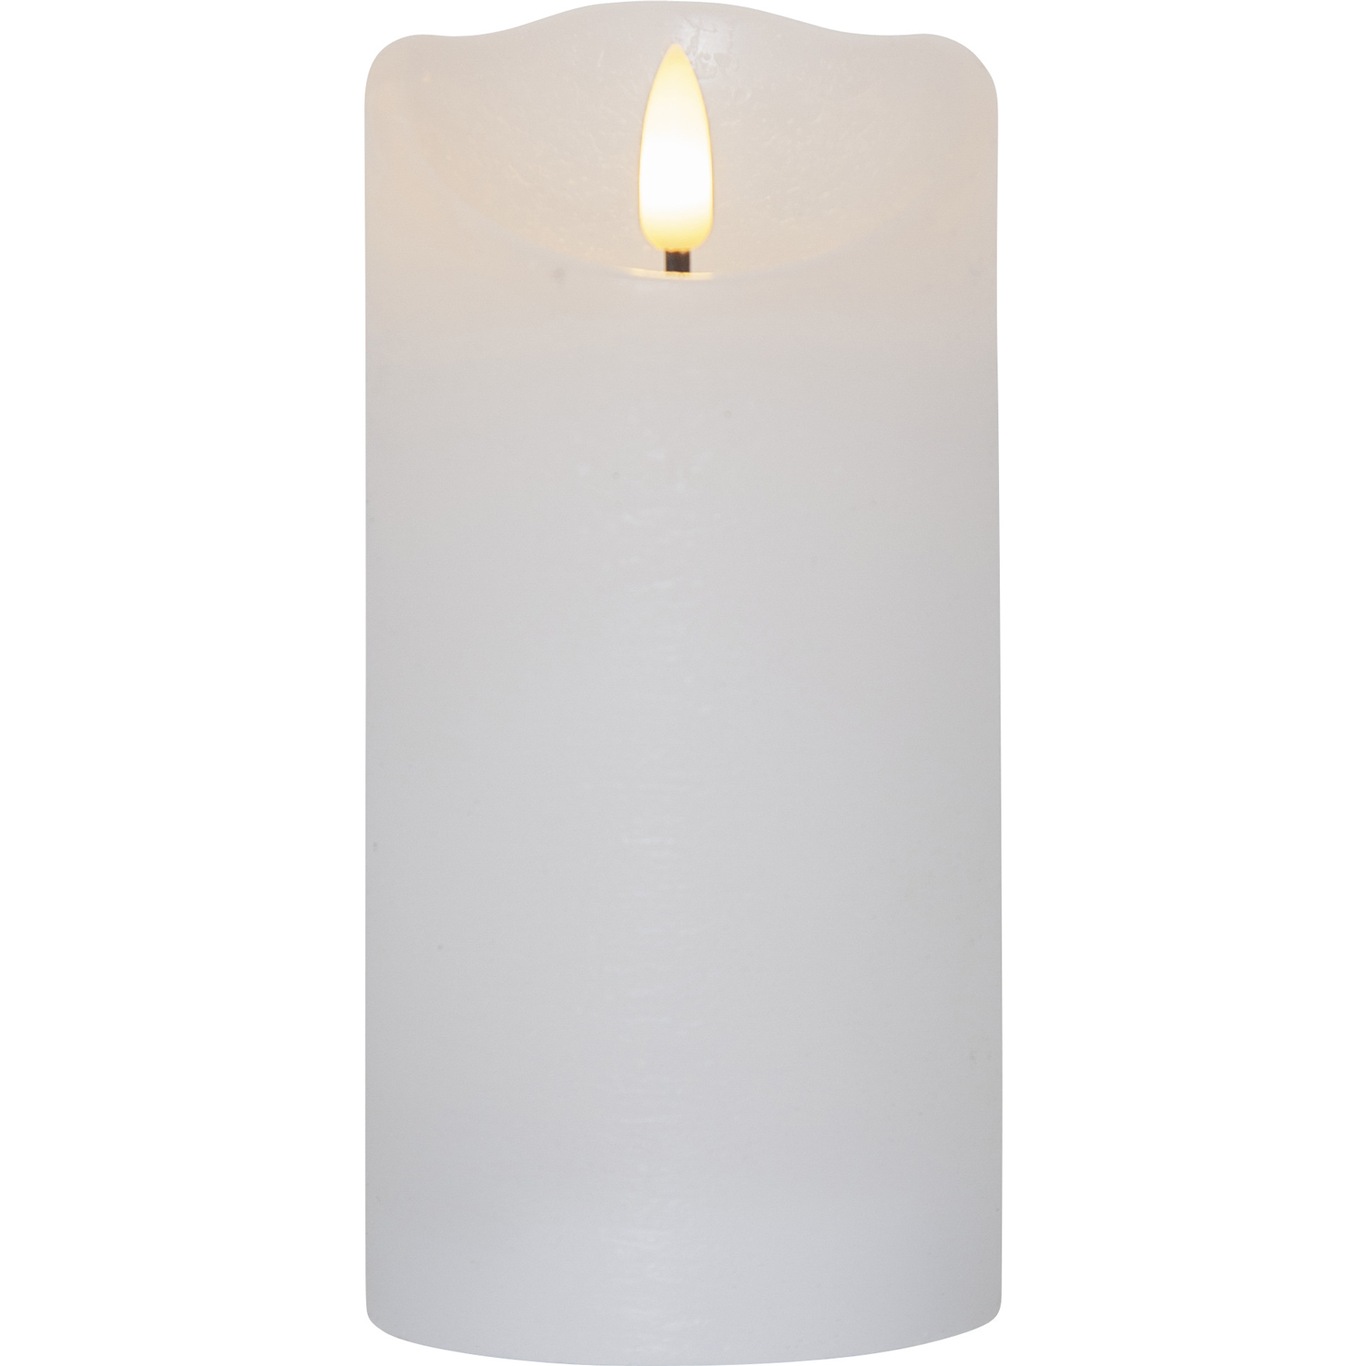 Flamme Rustic LED Pillar Candle White, 15 cm